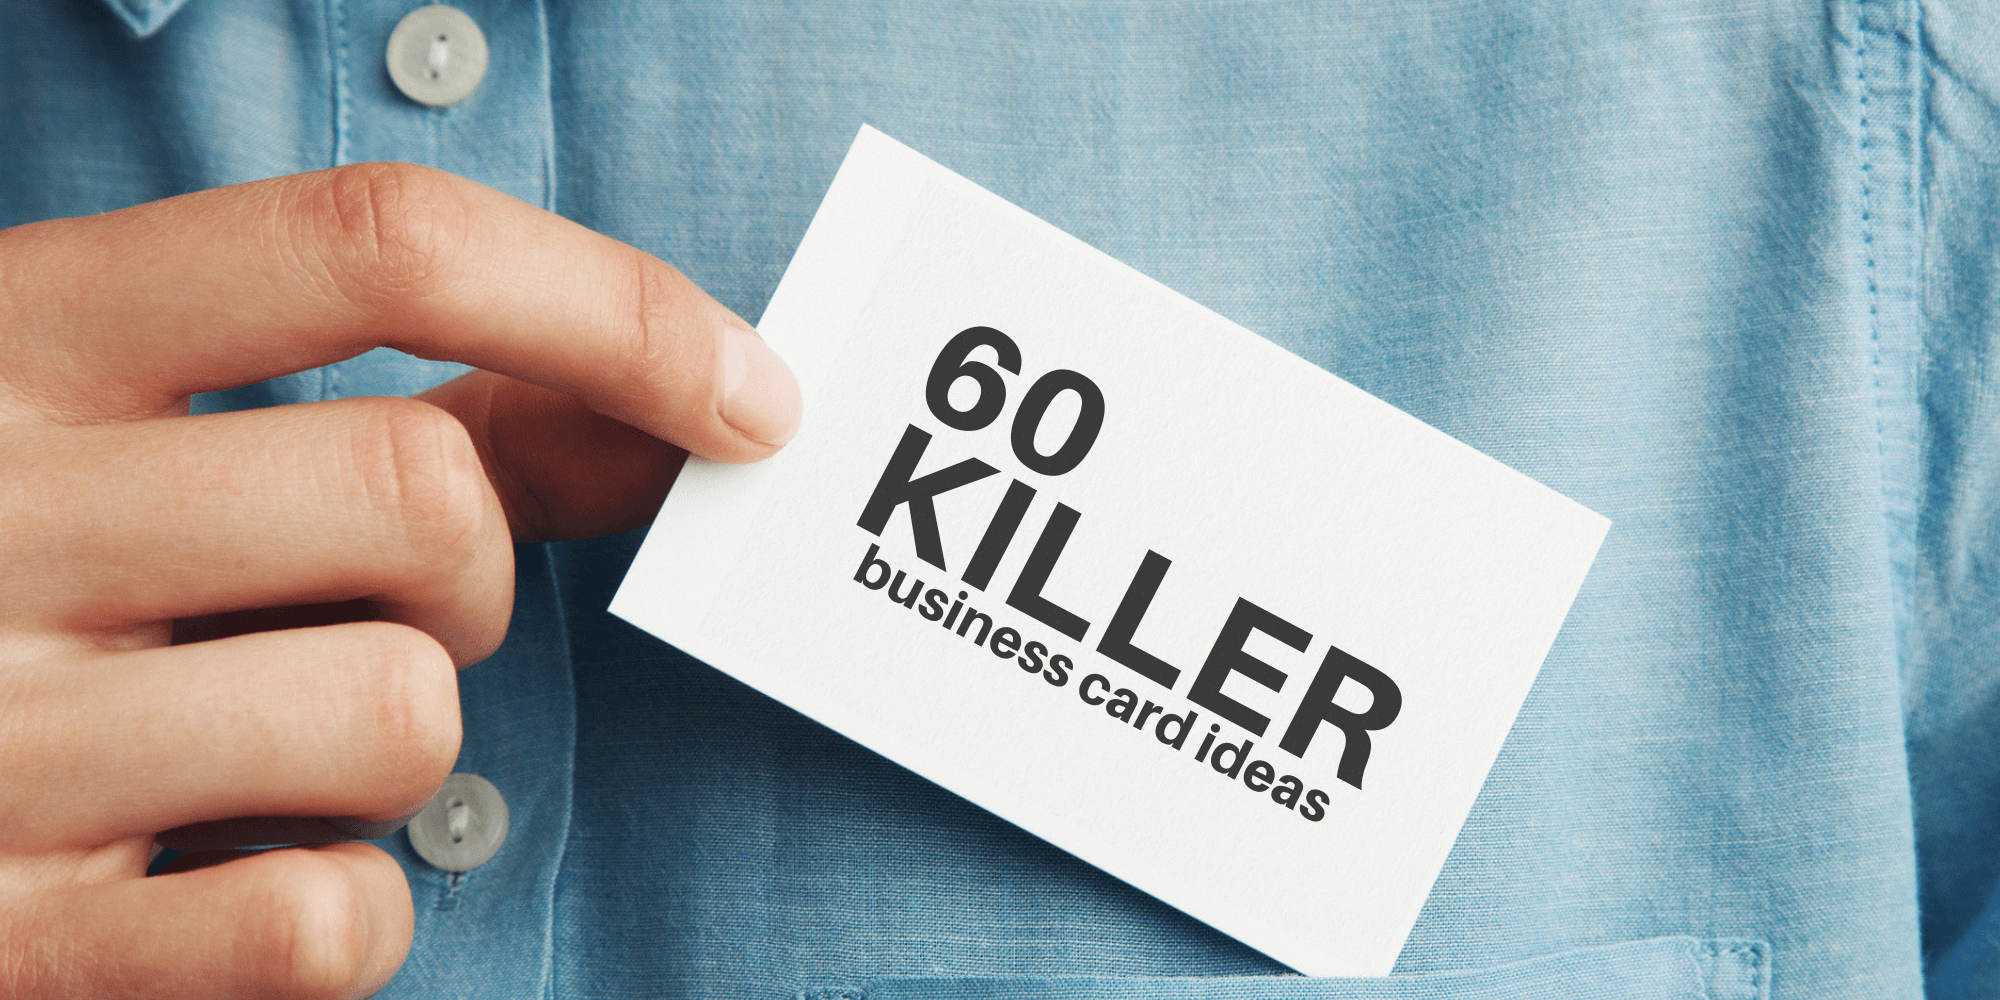 60 Modern Business Cards To Make A Killer First Impression Intended For Freelance Business Card Template